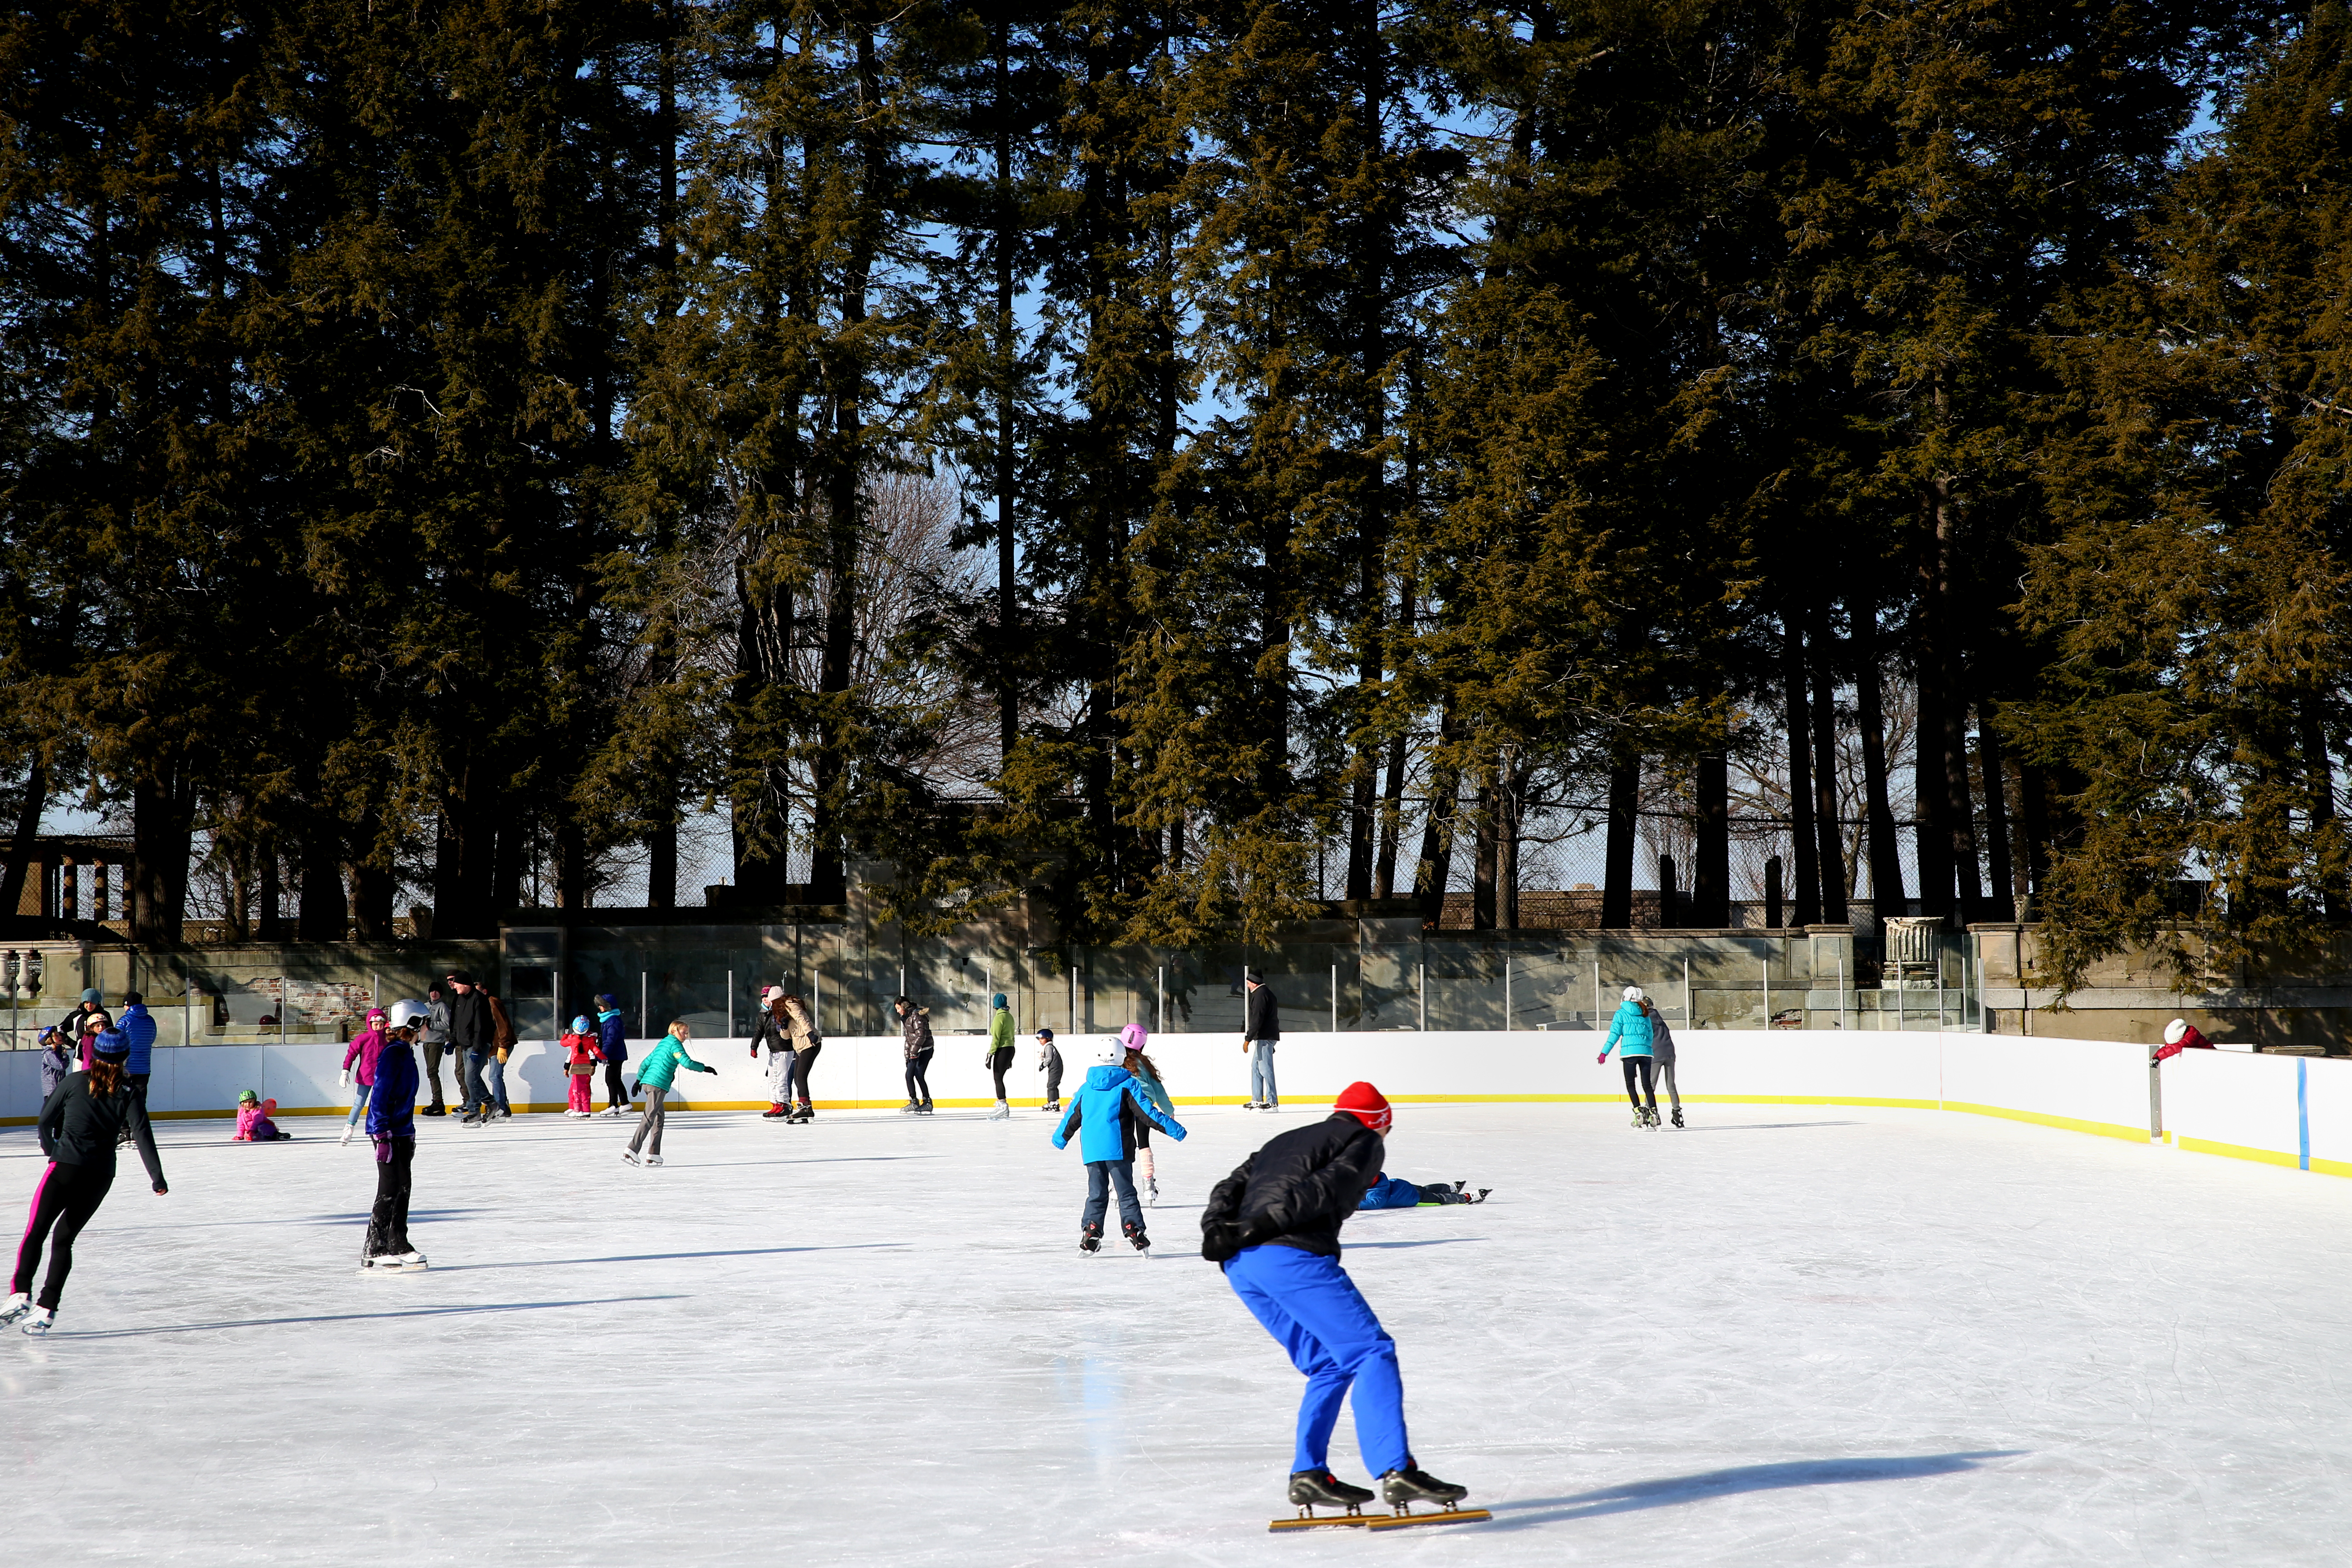 Go skating with Wally and Tessie on the Frog Pond